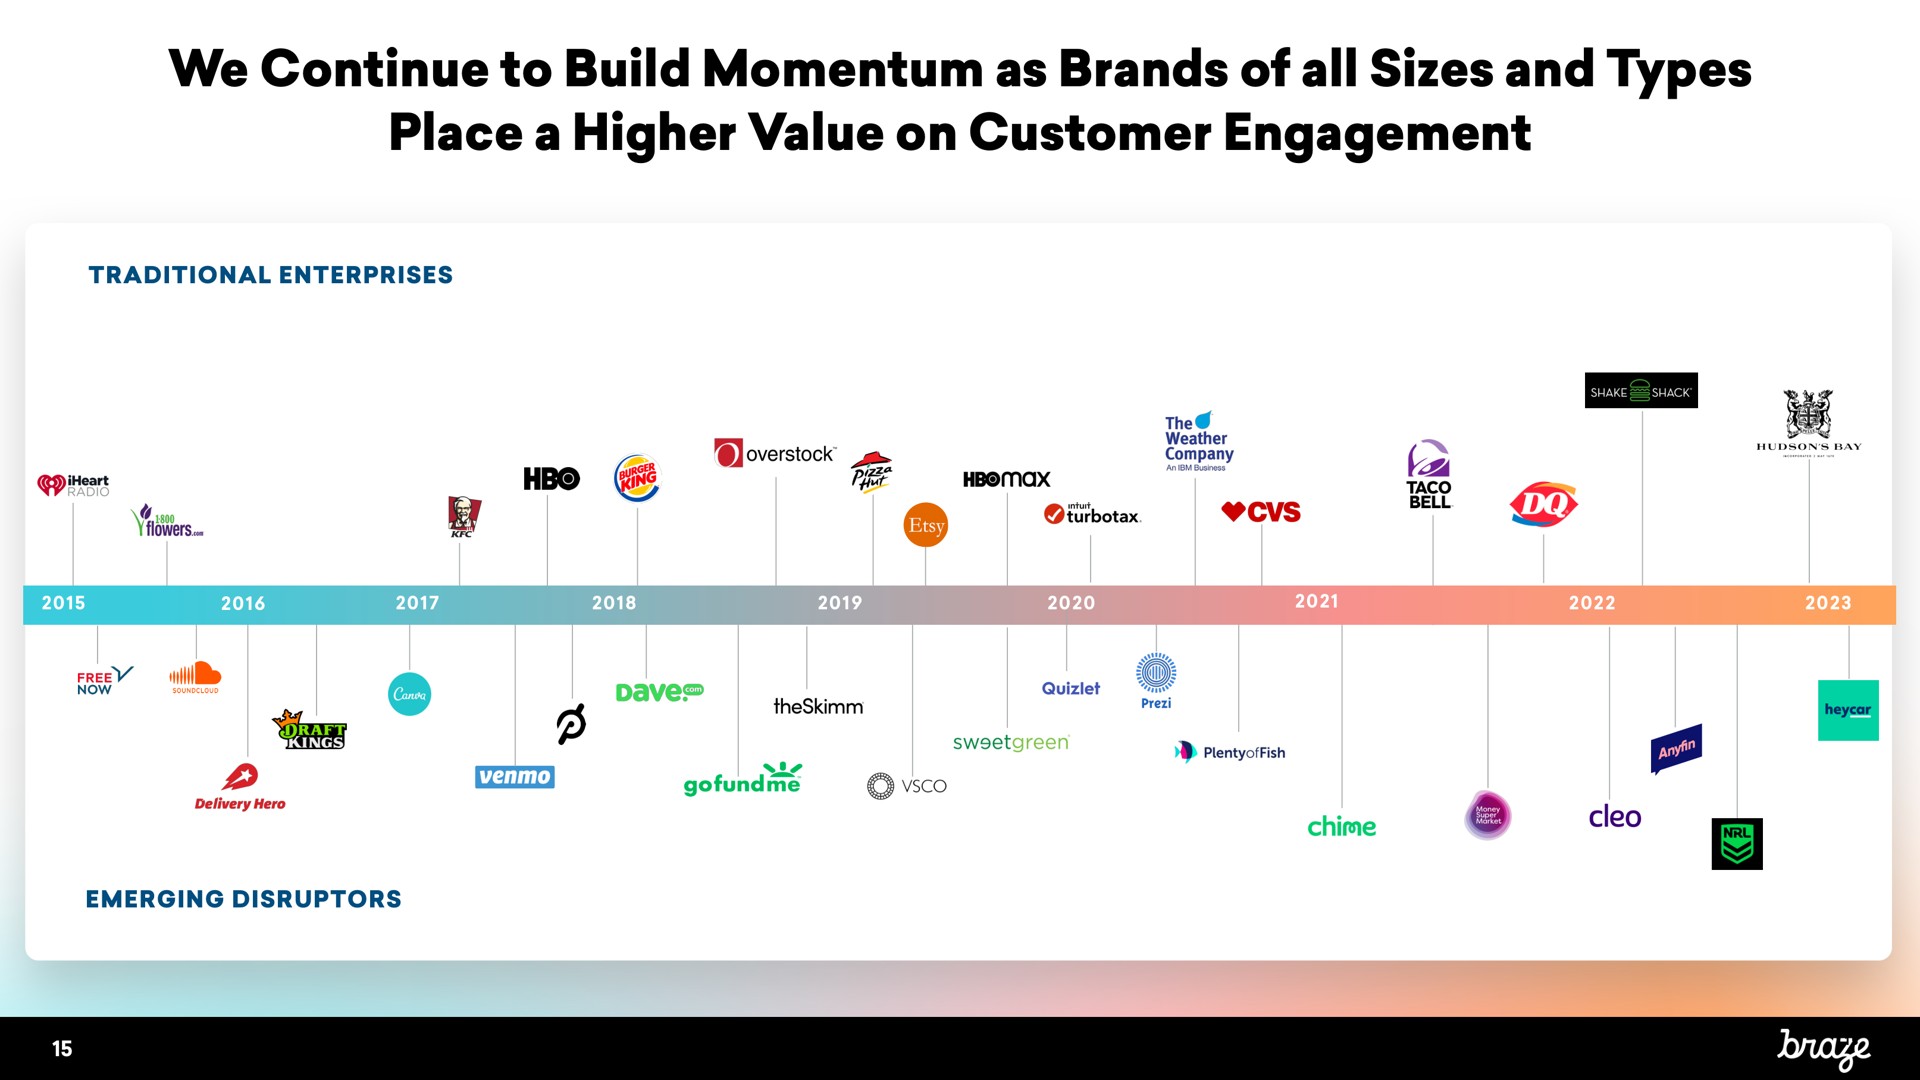 we continue to build momentum as brands of all sizes and types place a higher value on customer engagement | Braze